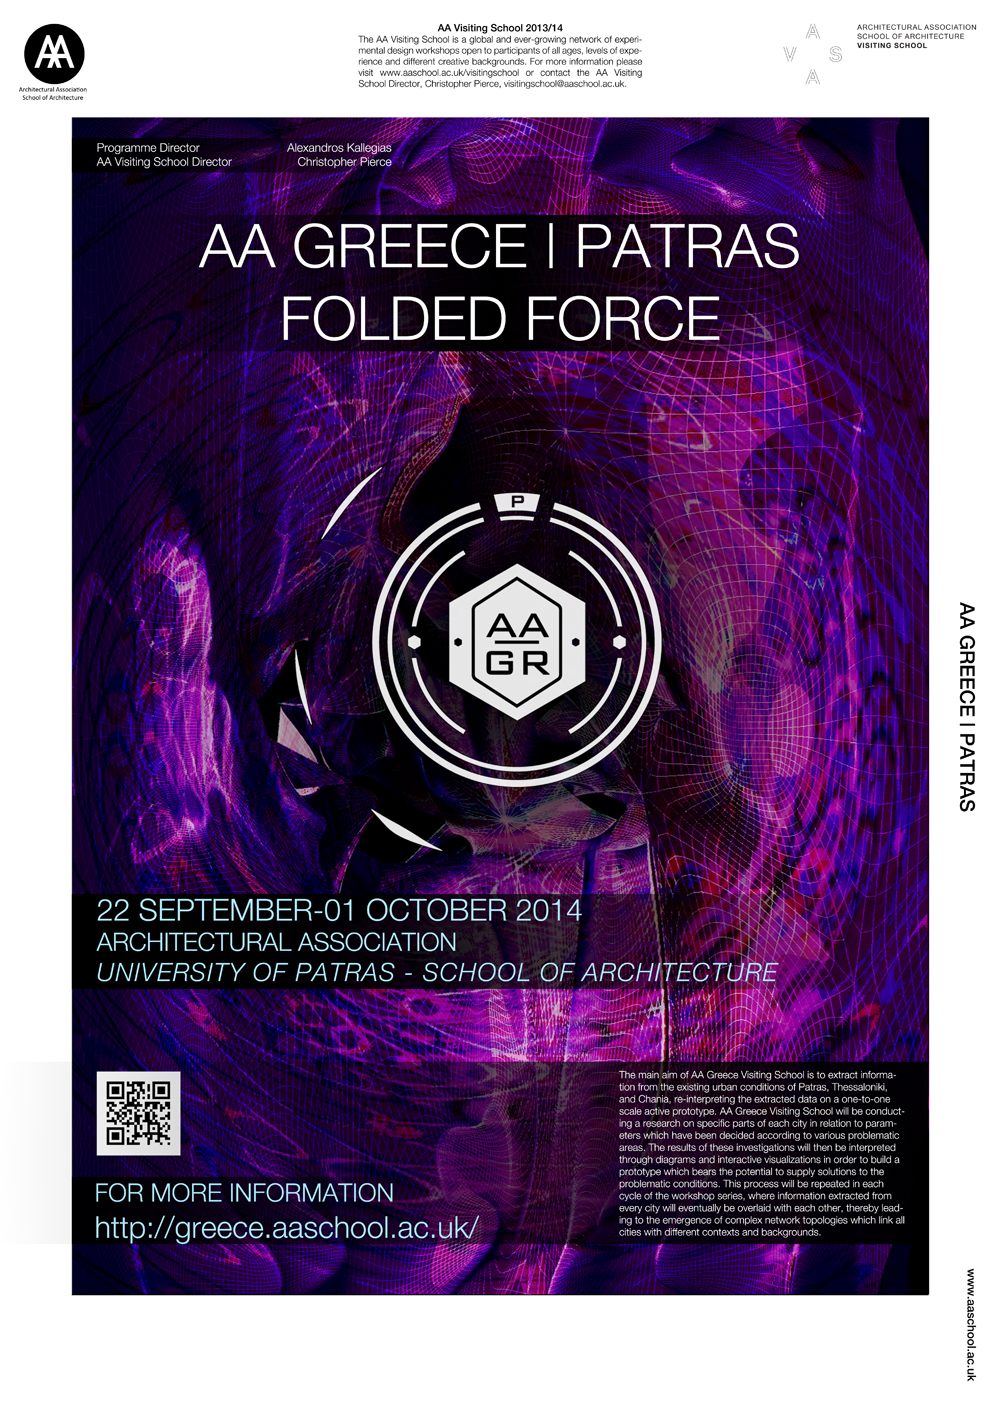 Archisearch AAVS_GREECE - FOLDED FORCE :: Projections - University of Patras